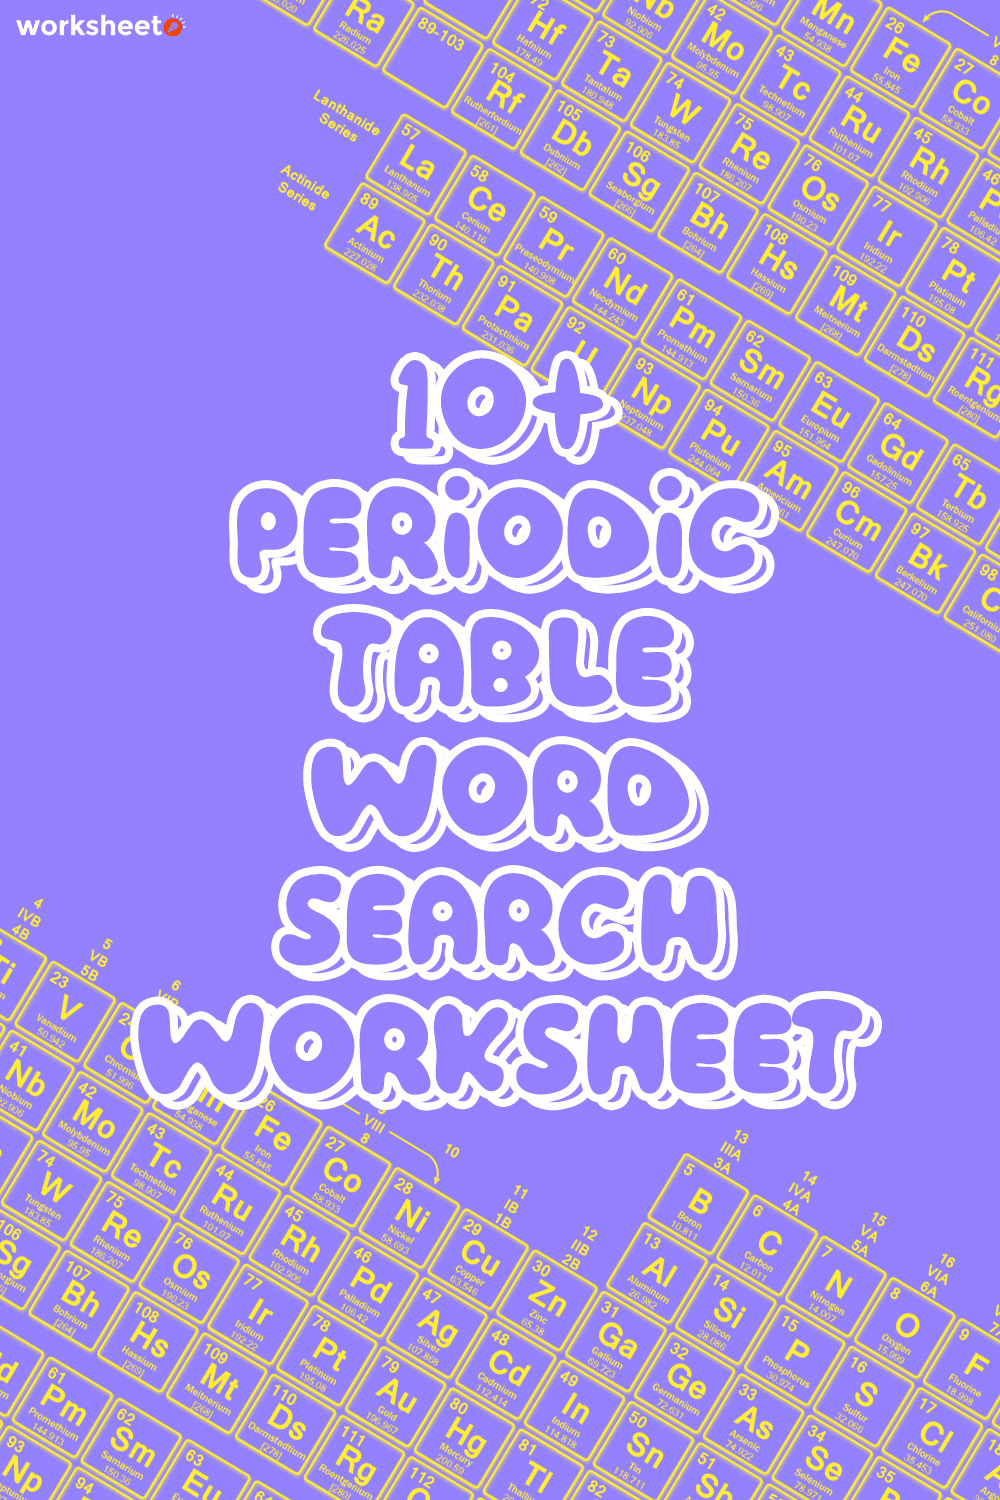 10 Images of Periodic Table Word Search Worksheet